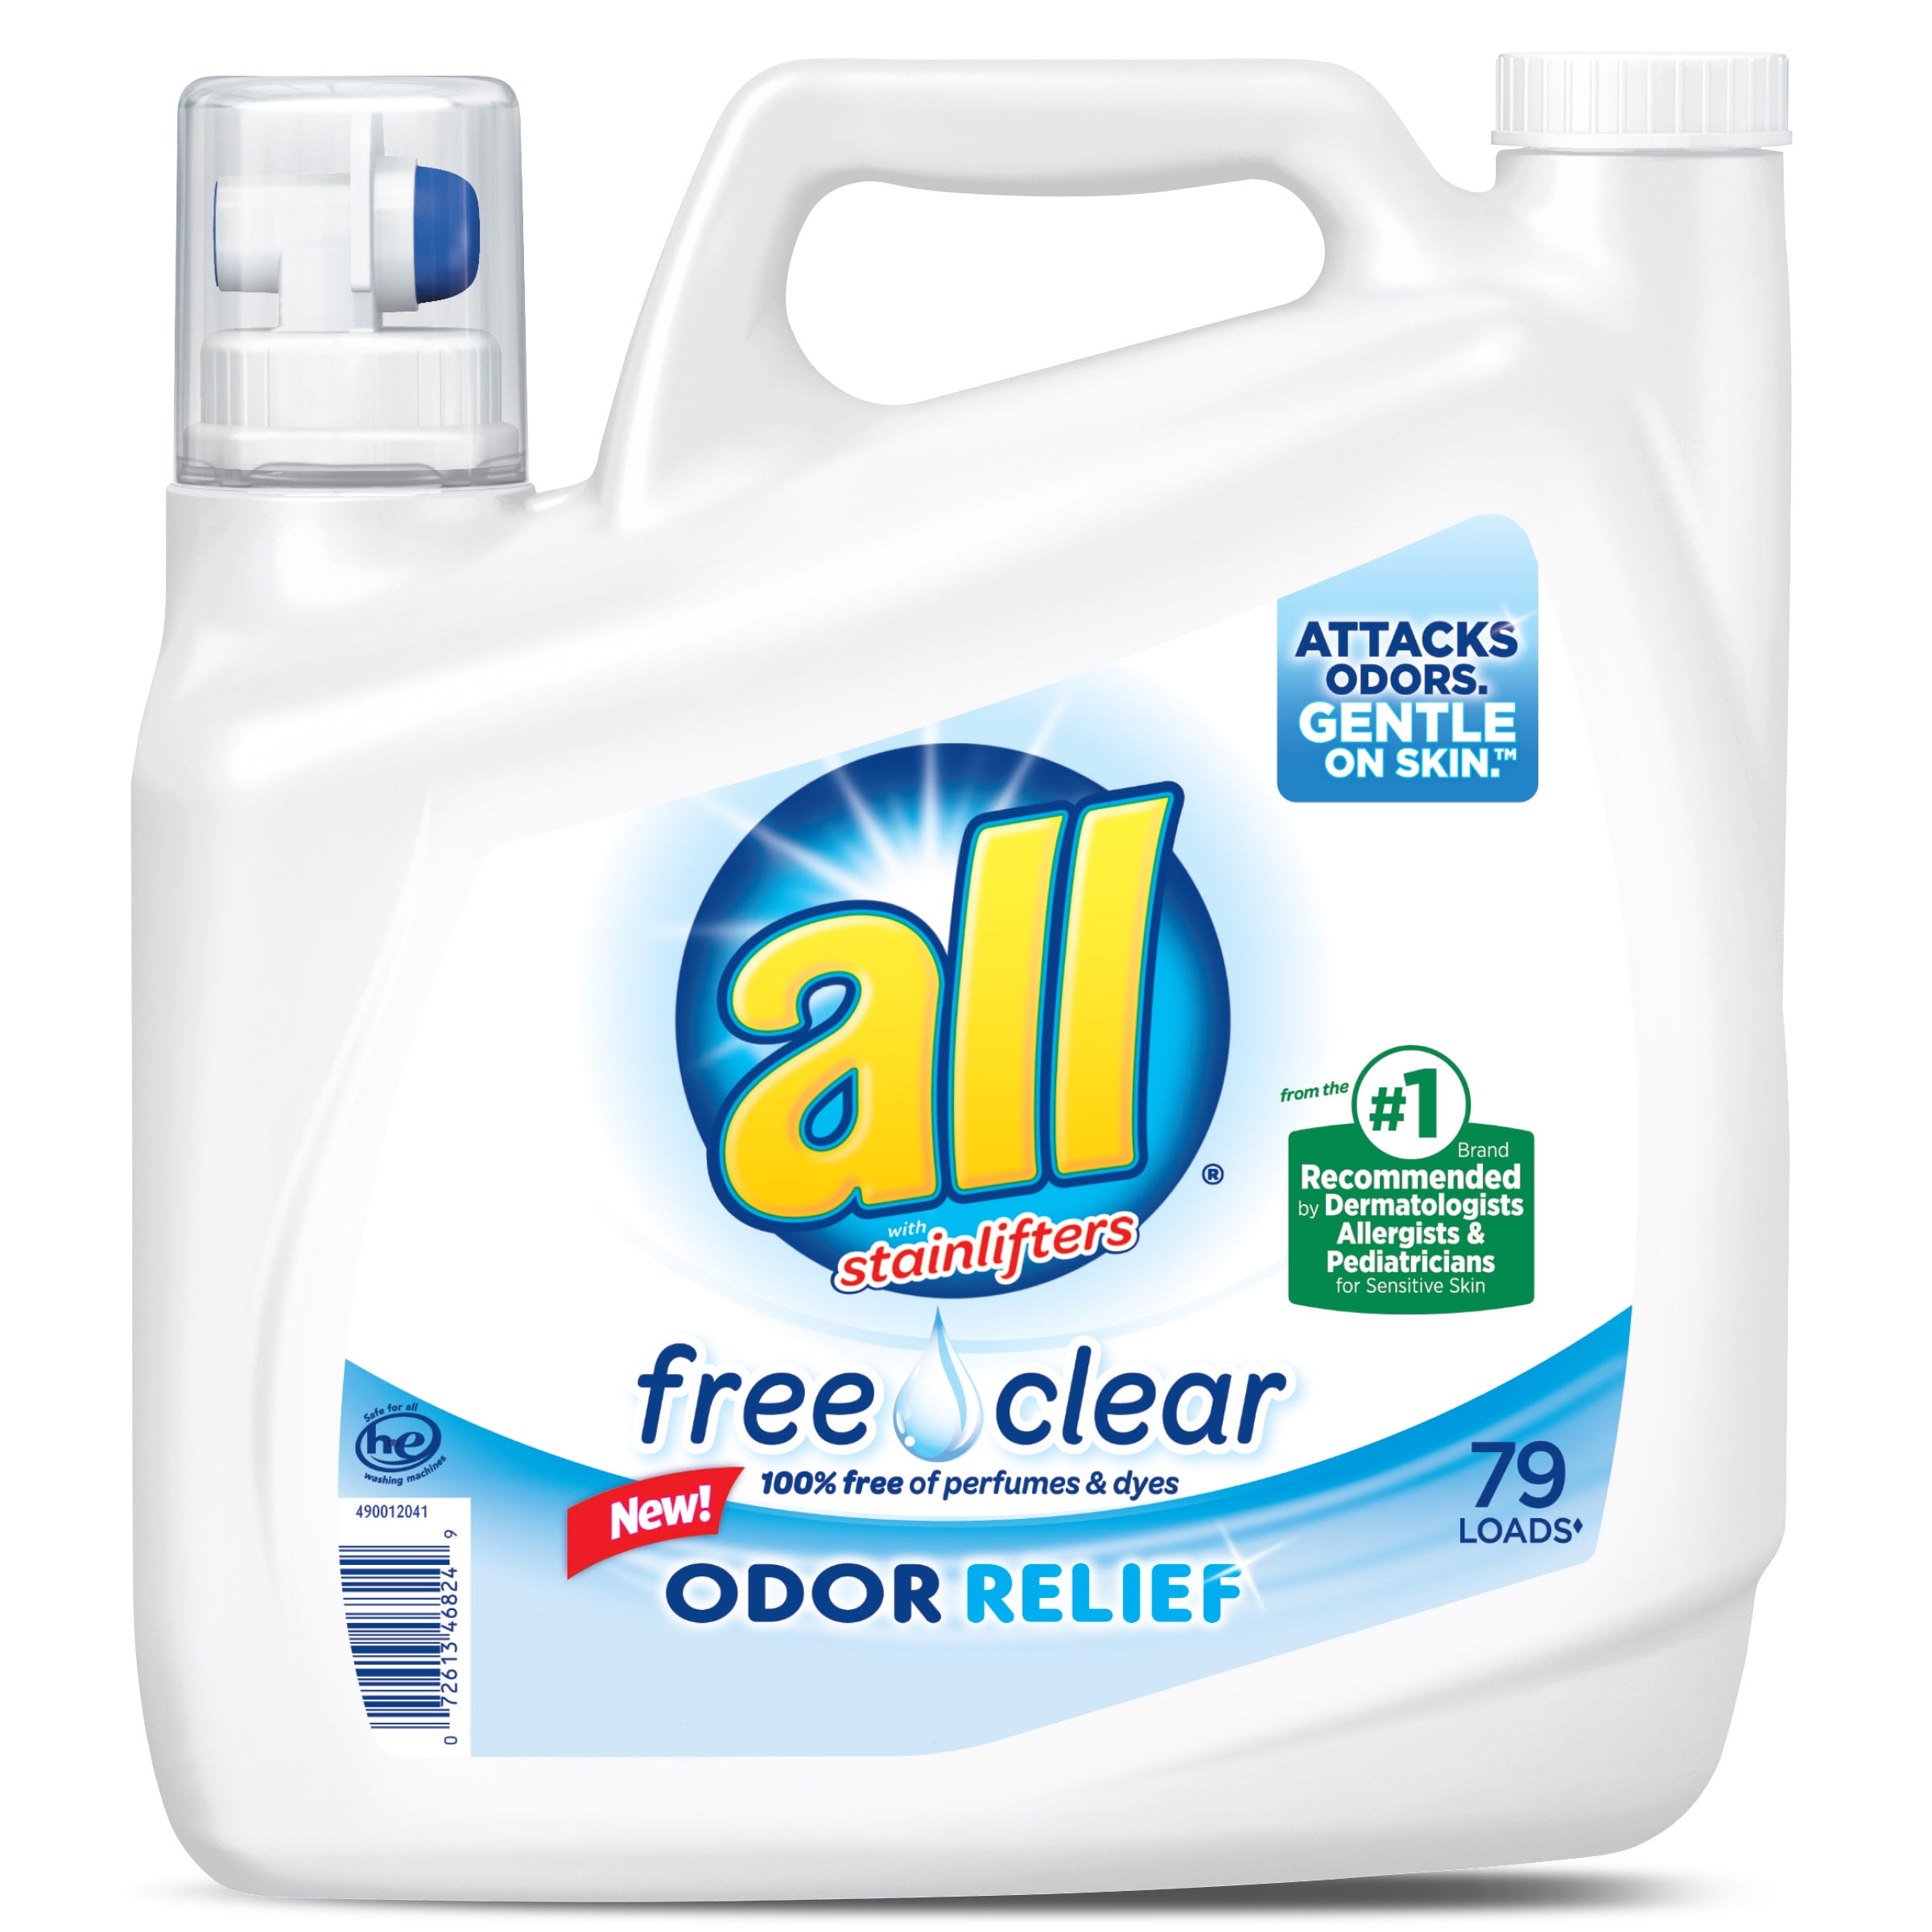 all-liquid-laundry-detergent-free-clear-with-odor-relief-141-fluid